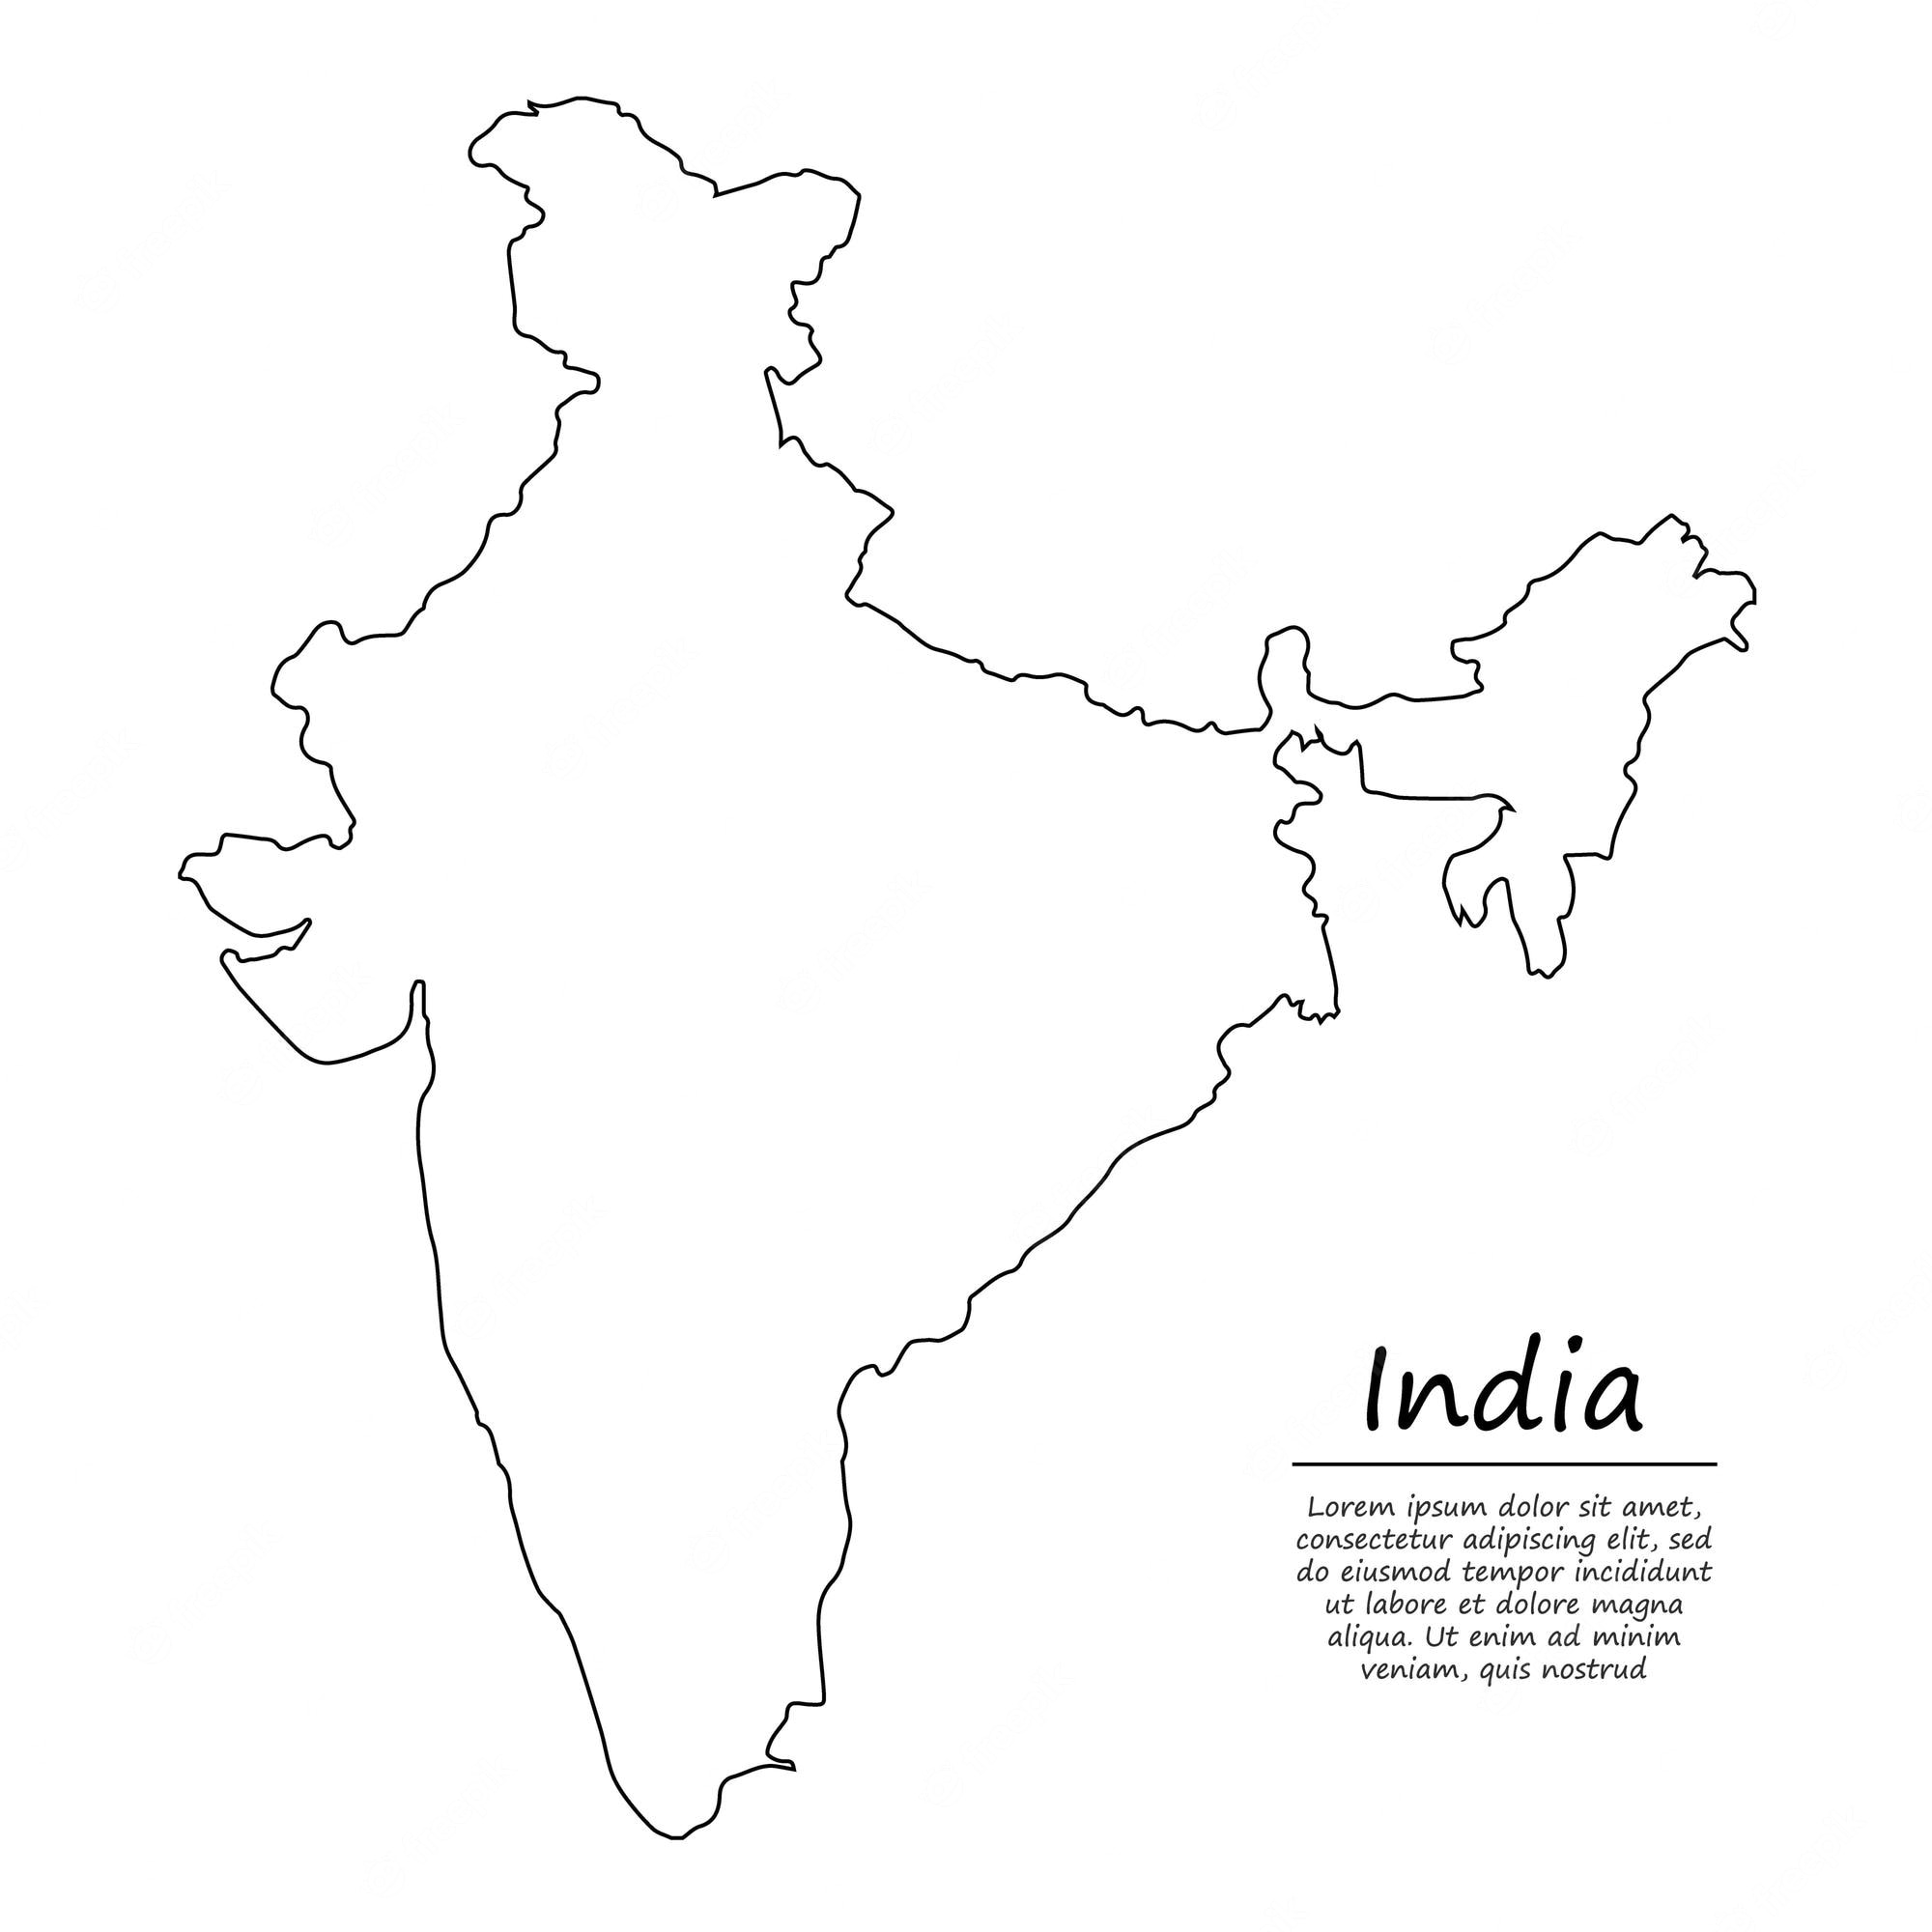 LEARN How to Draw Map of India in Few Seconds | India map, Map crafts, Drawn  map